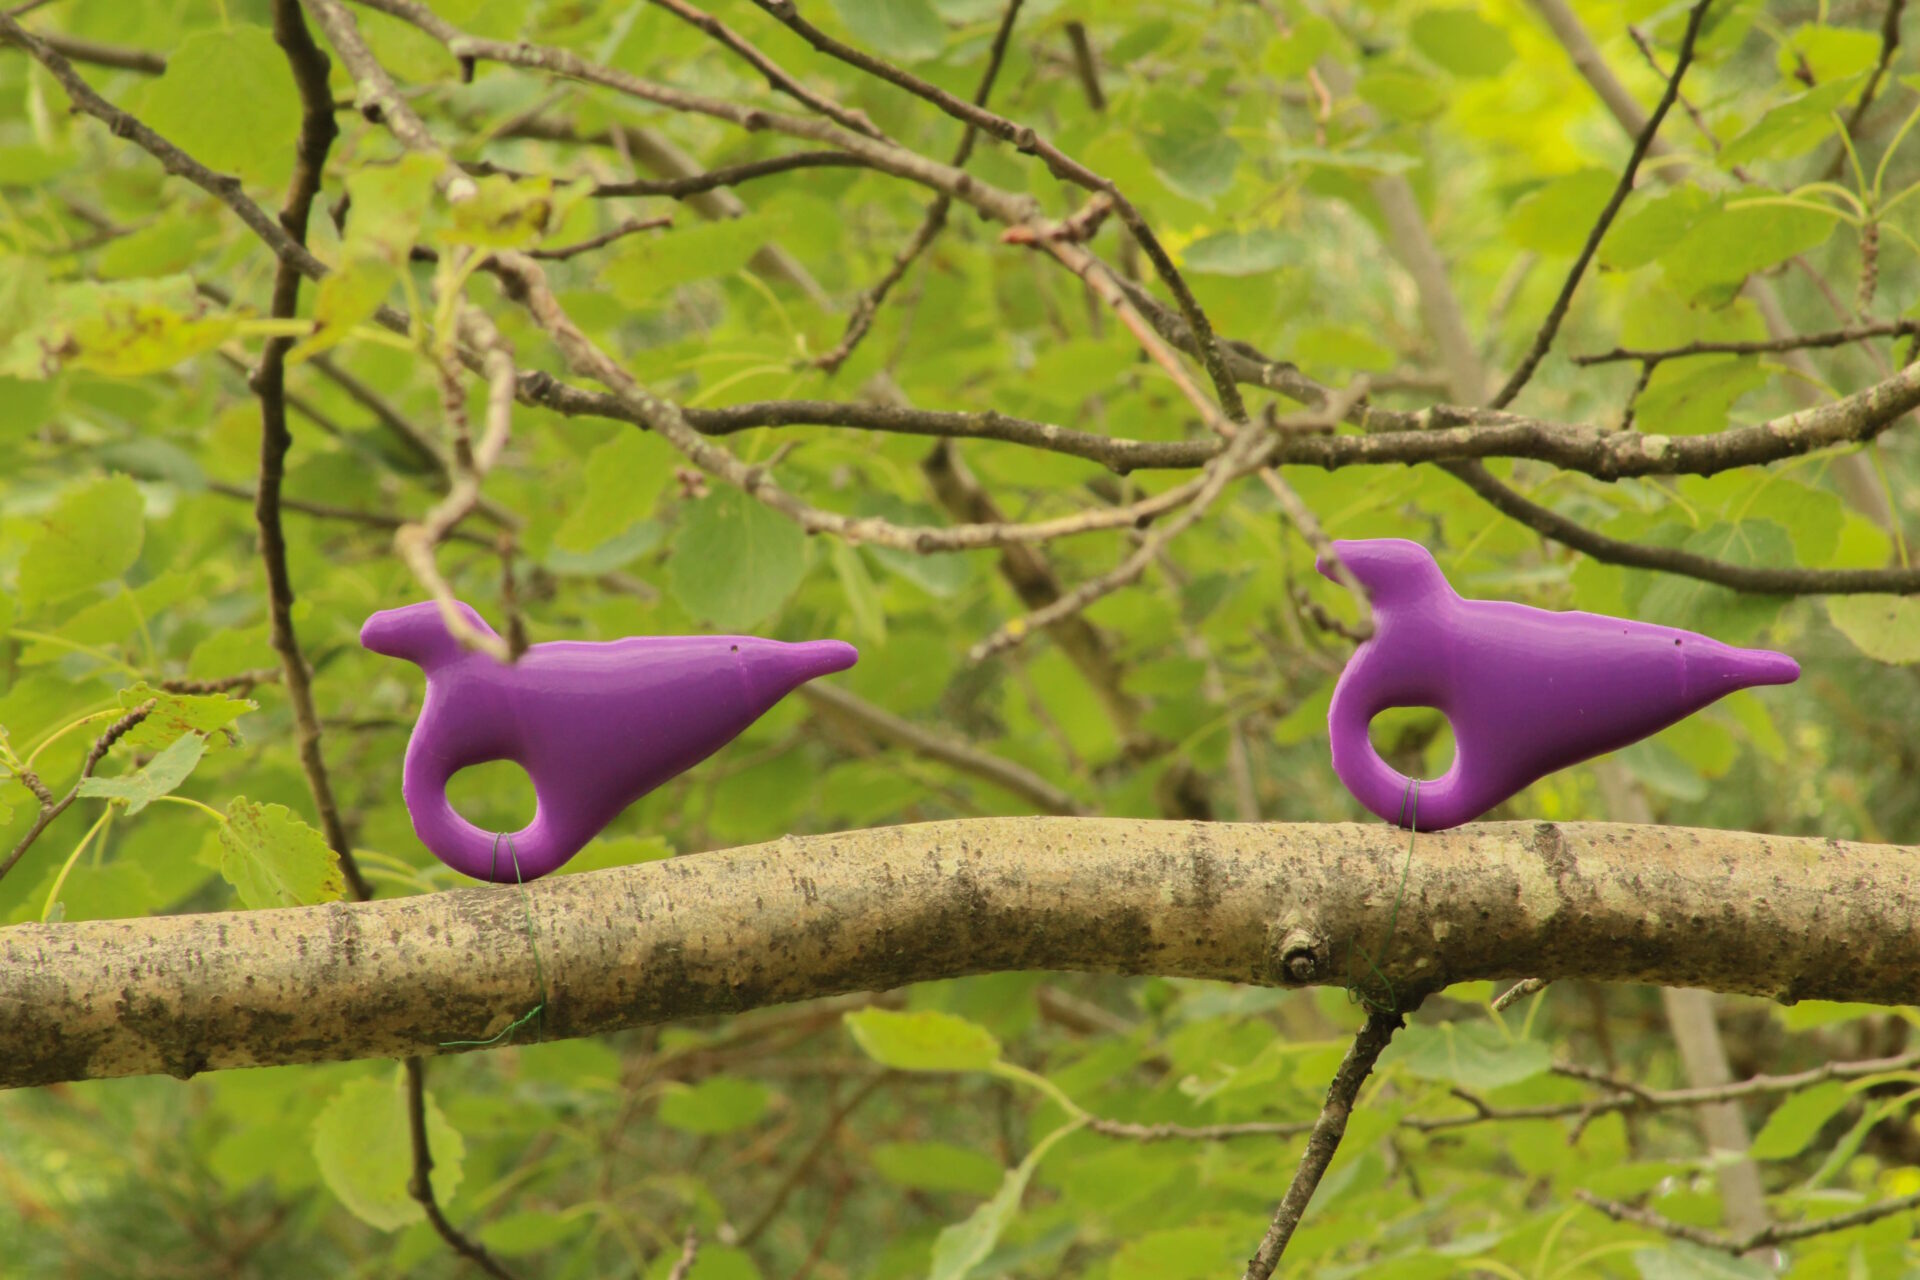 Two purple 3D prints resembling abstract birds perched on a branch with green leaves in the background.